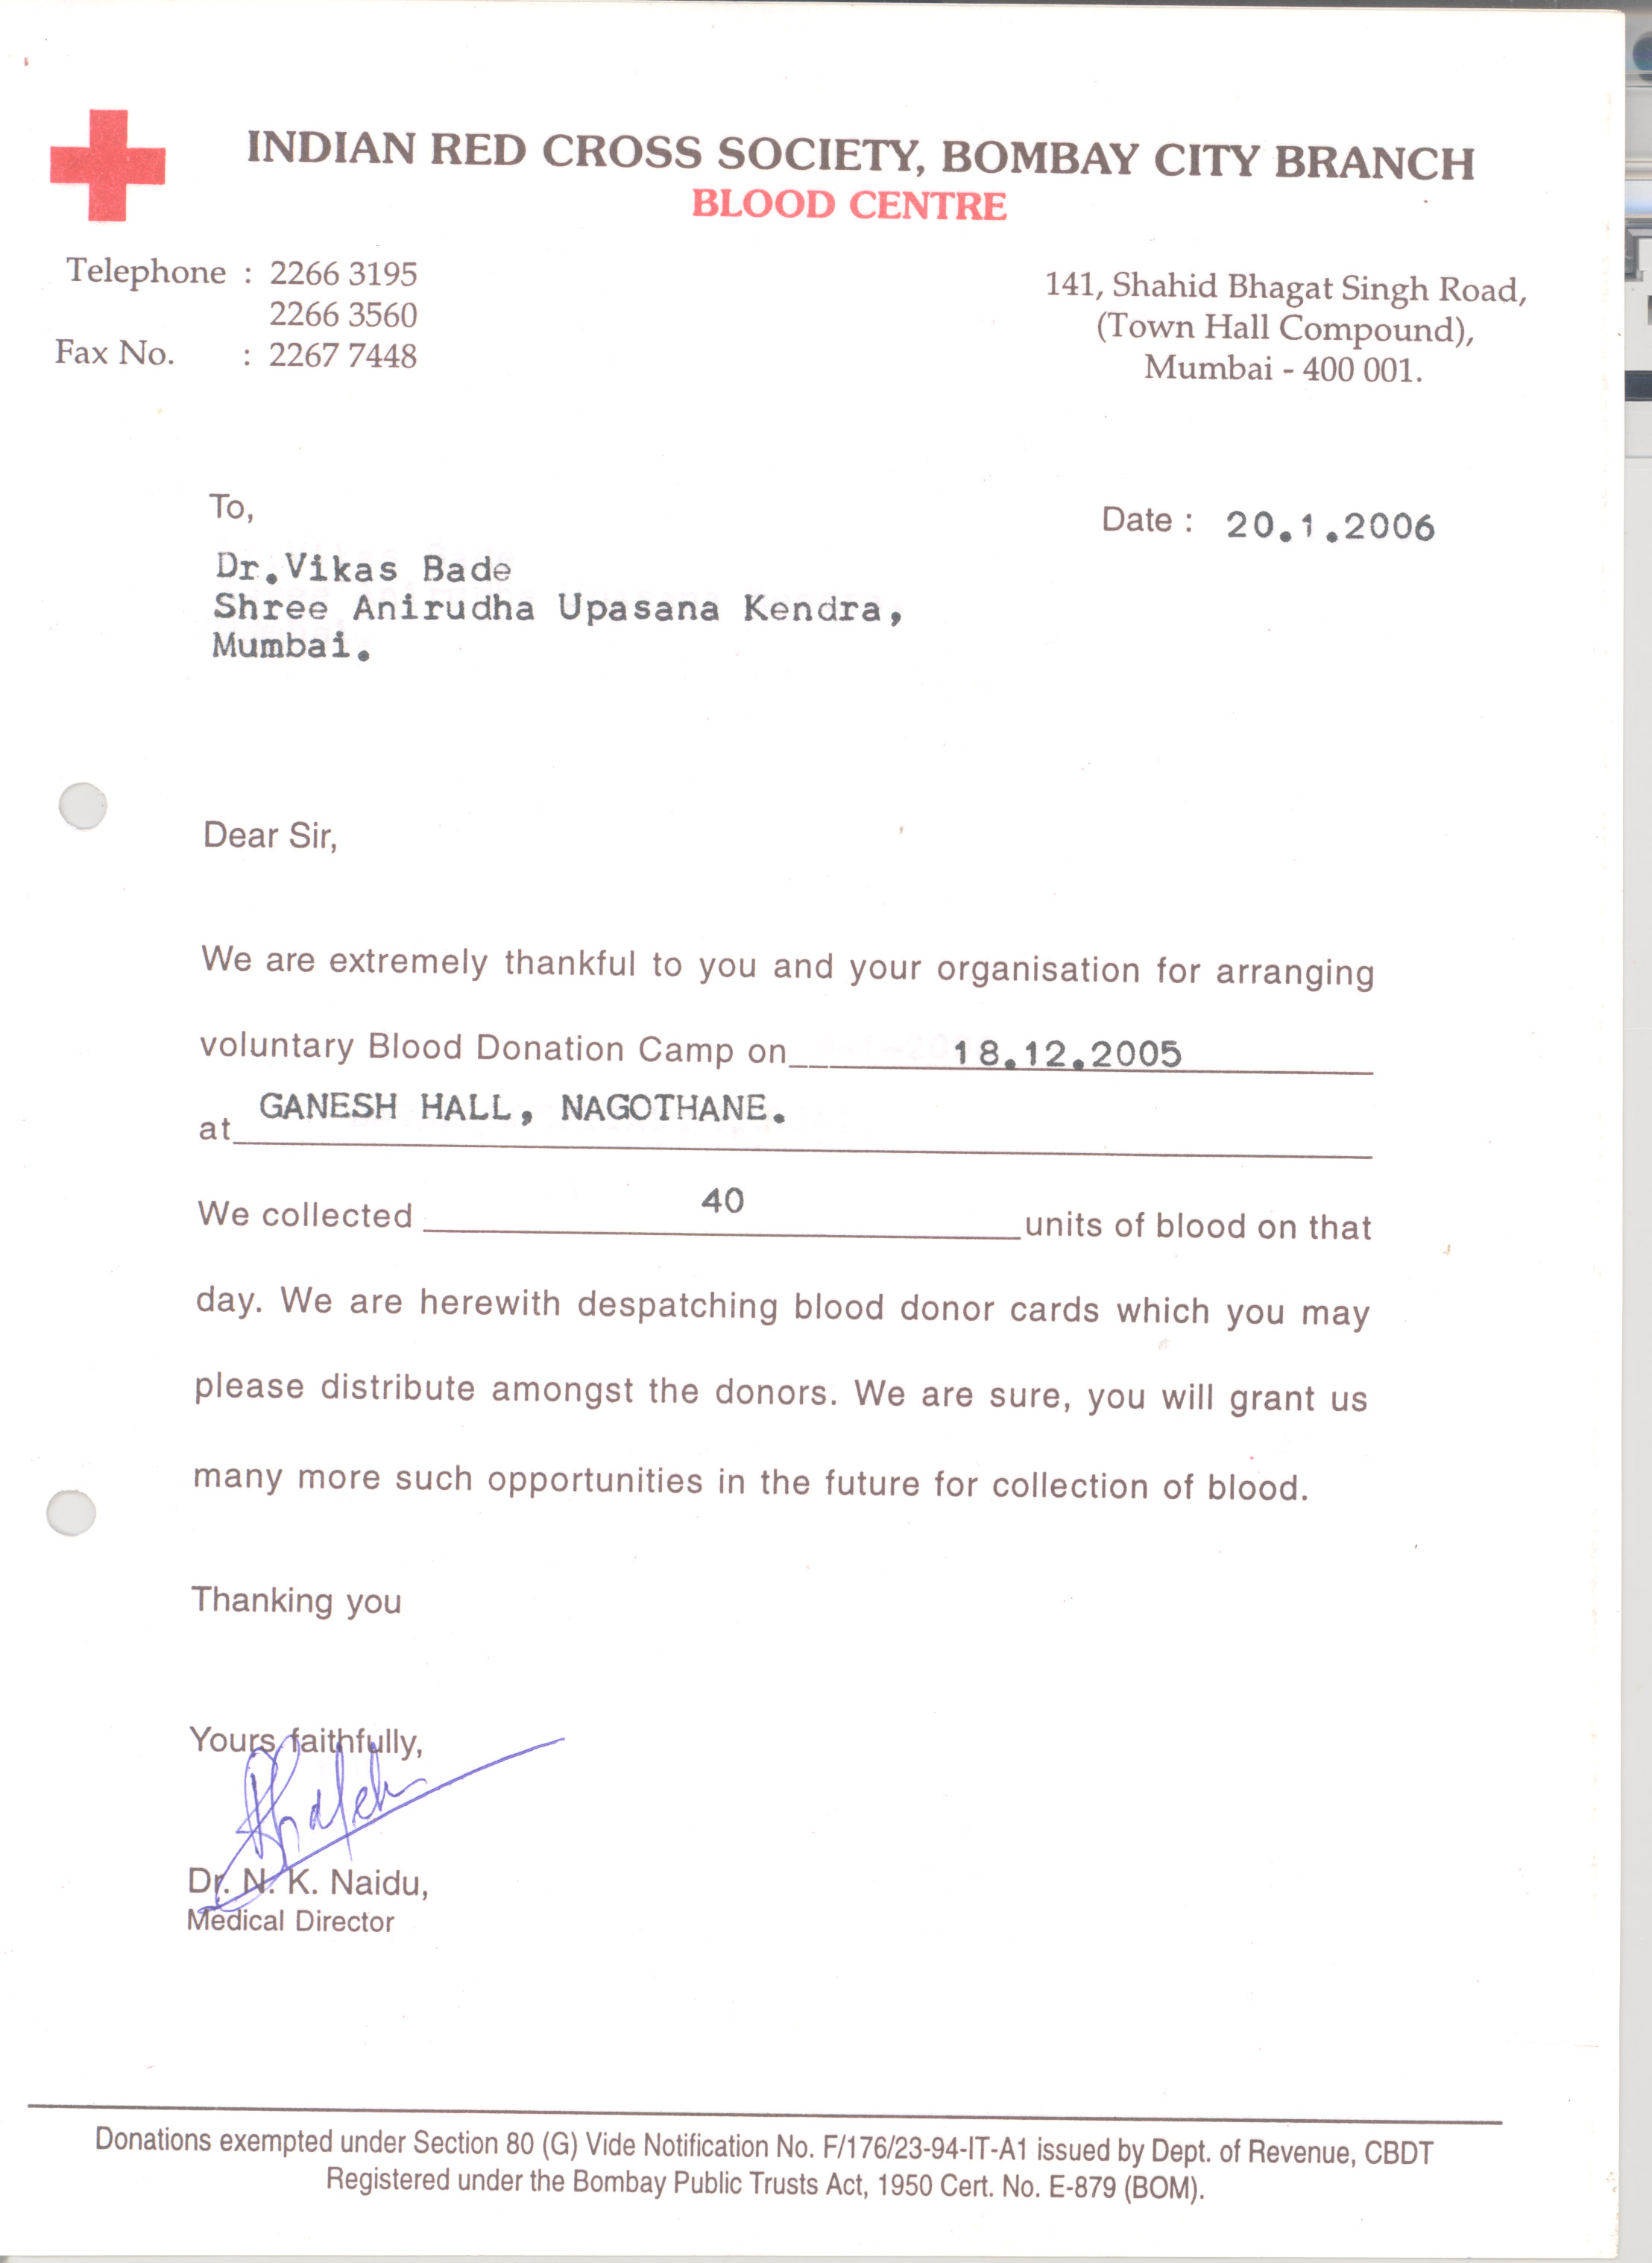 Appreciation-Letter from Indian Red Cross Society 2006 -for-Aniruddhafoundation-Compassion-Social-services